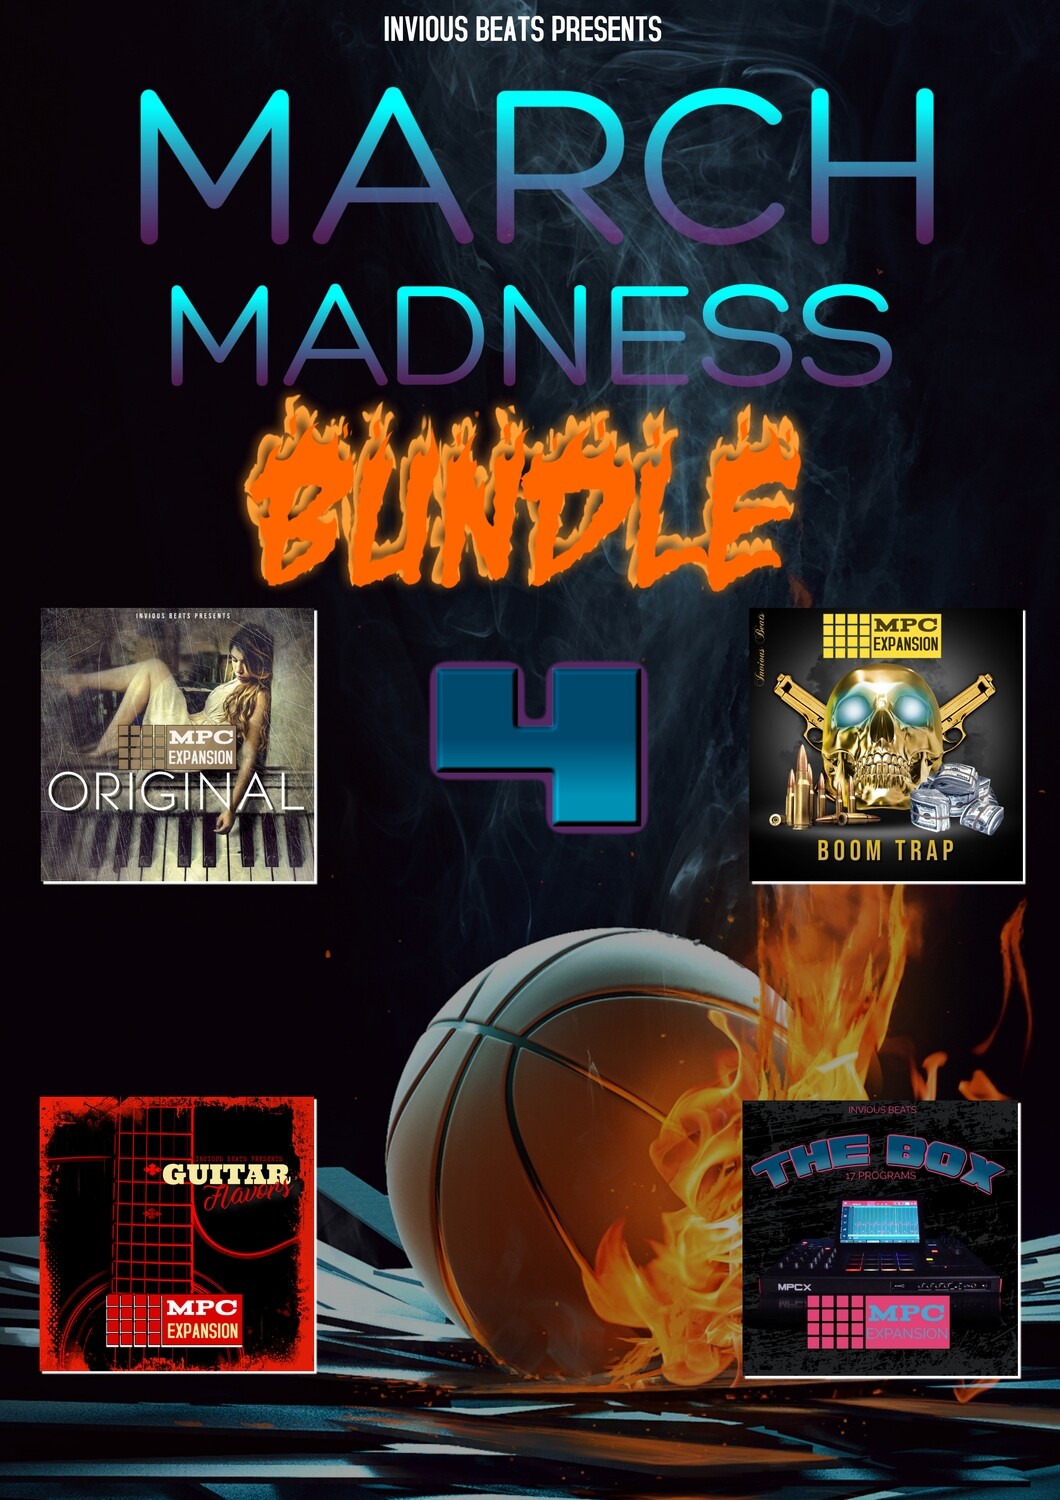 MPC EXPANSION MARCH MADDNESS BUNDLE 4 by INVIOUS